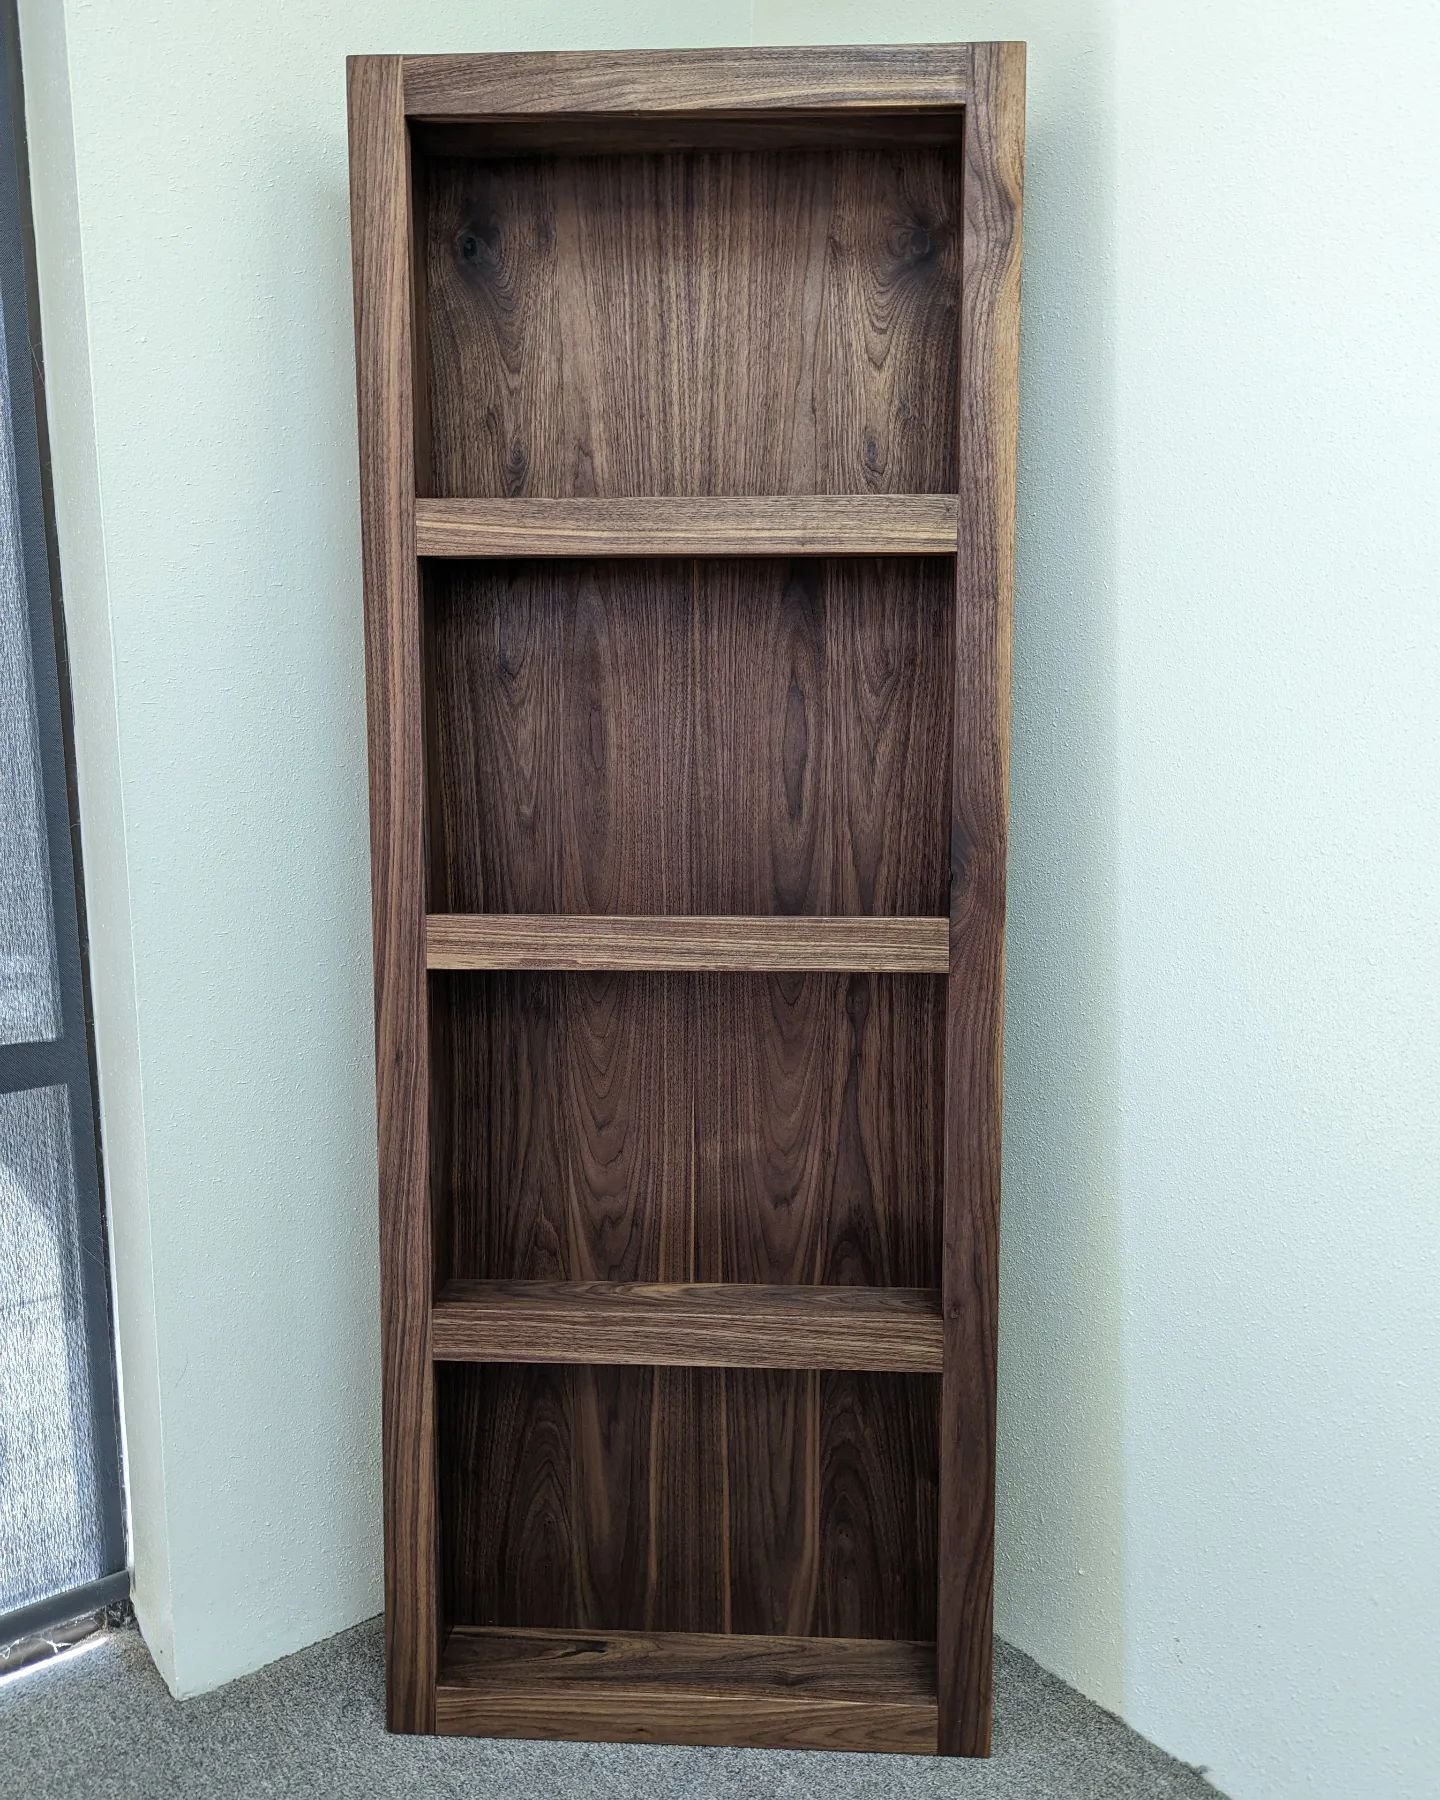 This in wall walnut wine rack is just about finished up. Love the book matched back panel!
.
.
.
#c2woodcraft #woodworking #resin #denver #englewood #localbusiness #custom #creation #woodcraft #maker #wine #rack #walnut #bookmatch